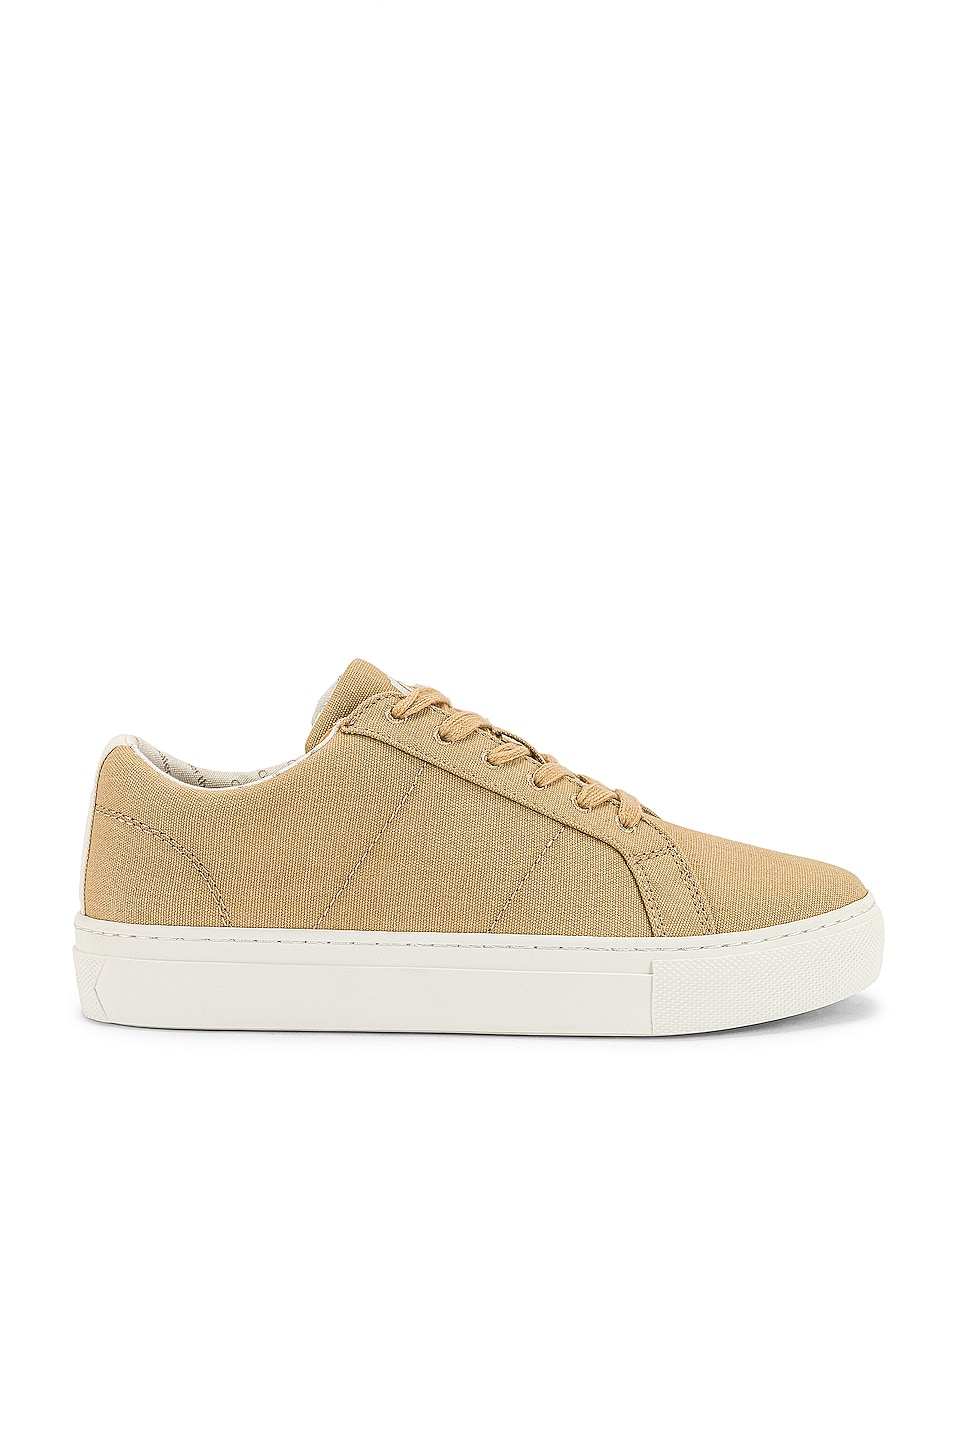 GREATS Royale Eco Canvas Sneaker in Stone | REVOLVE